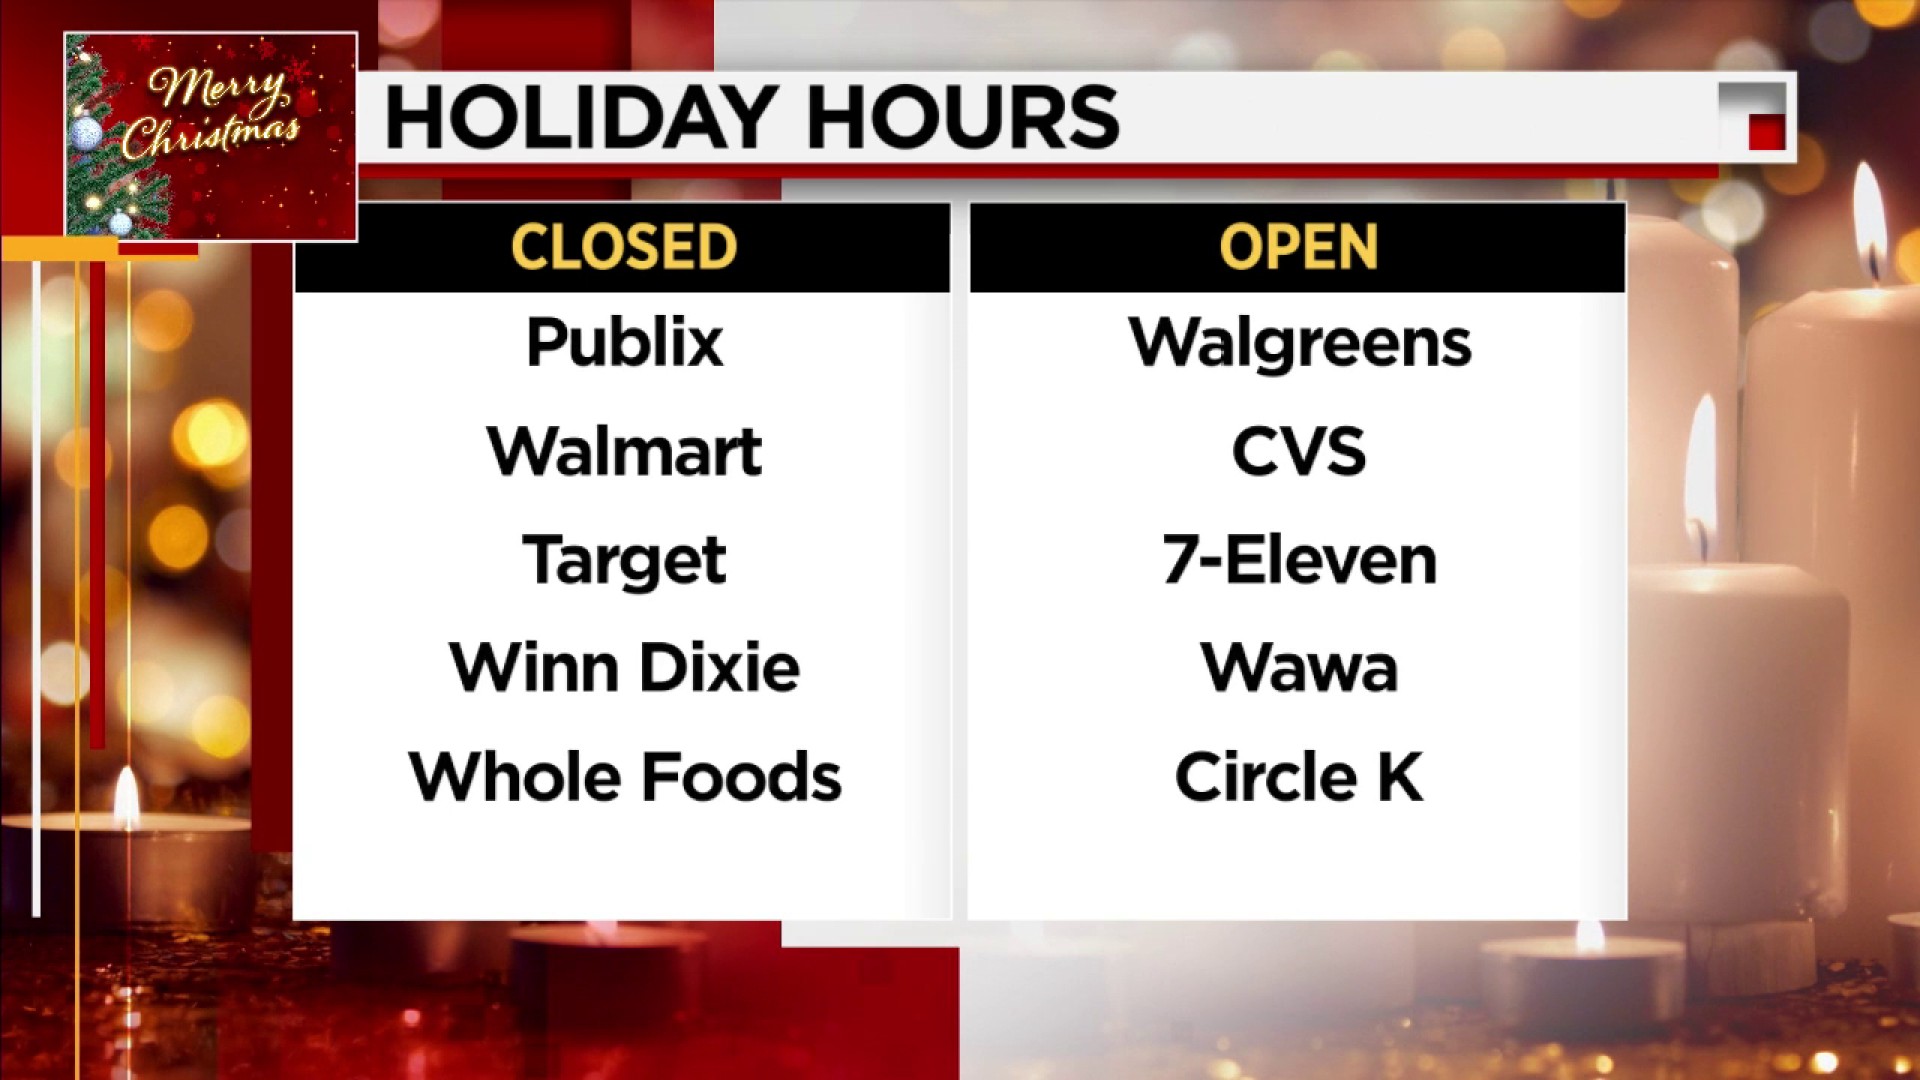 UPDATE: Changes to what's open and closed on the new holiday Sept